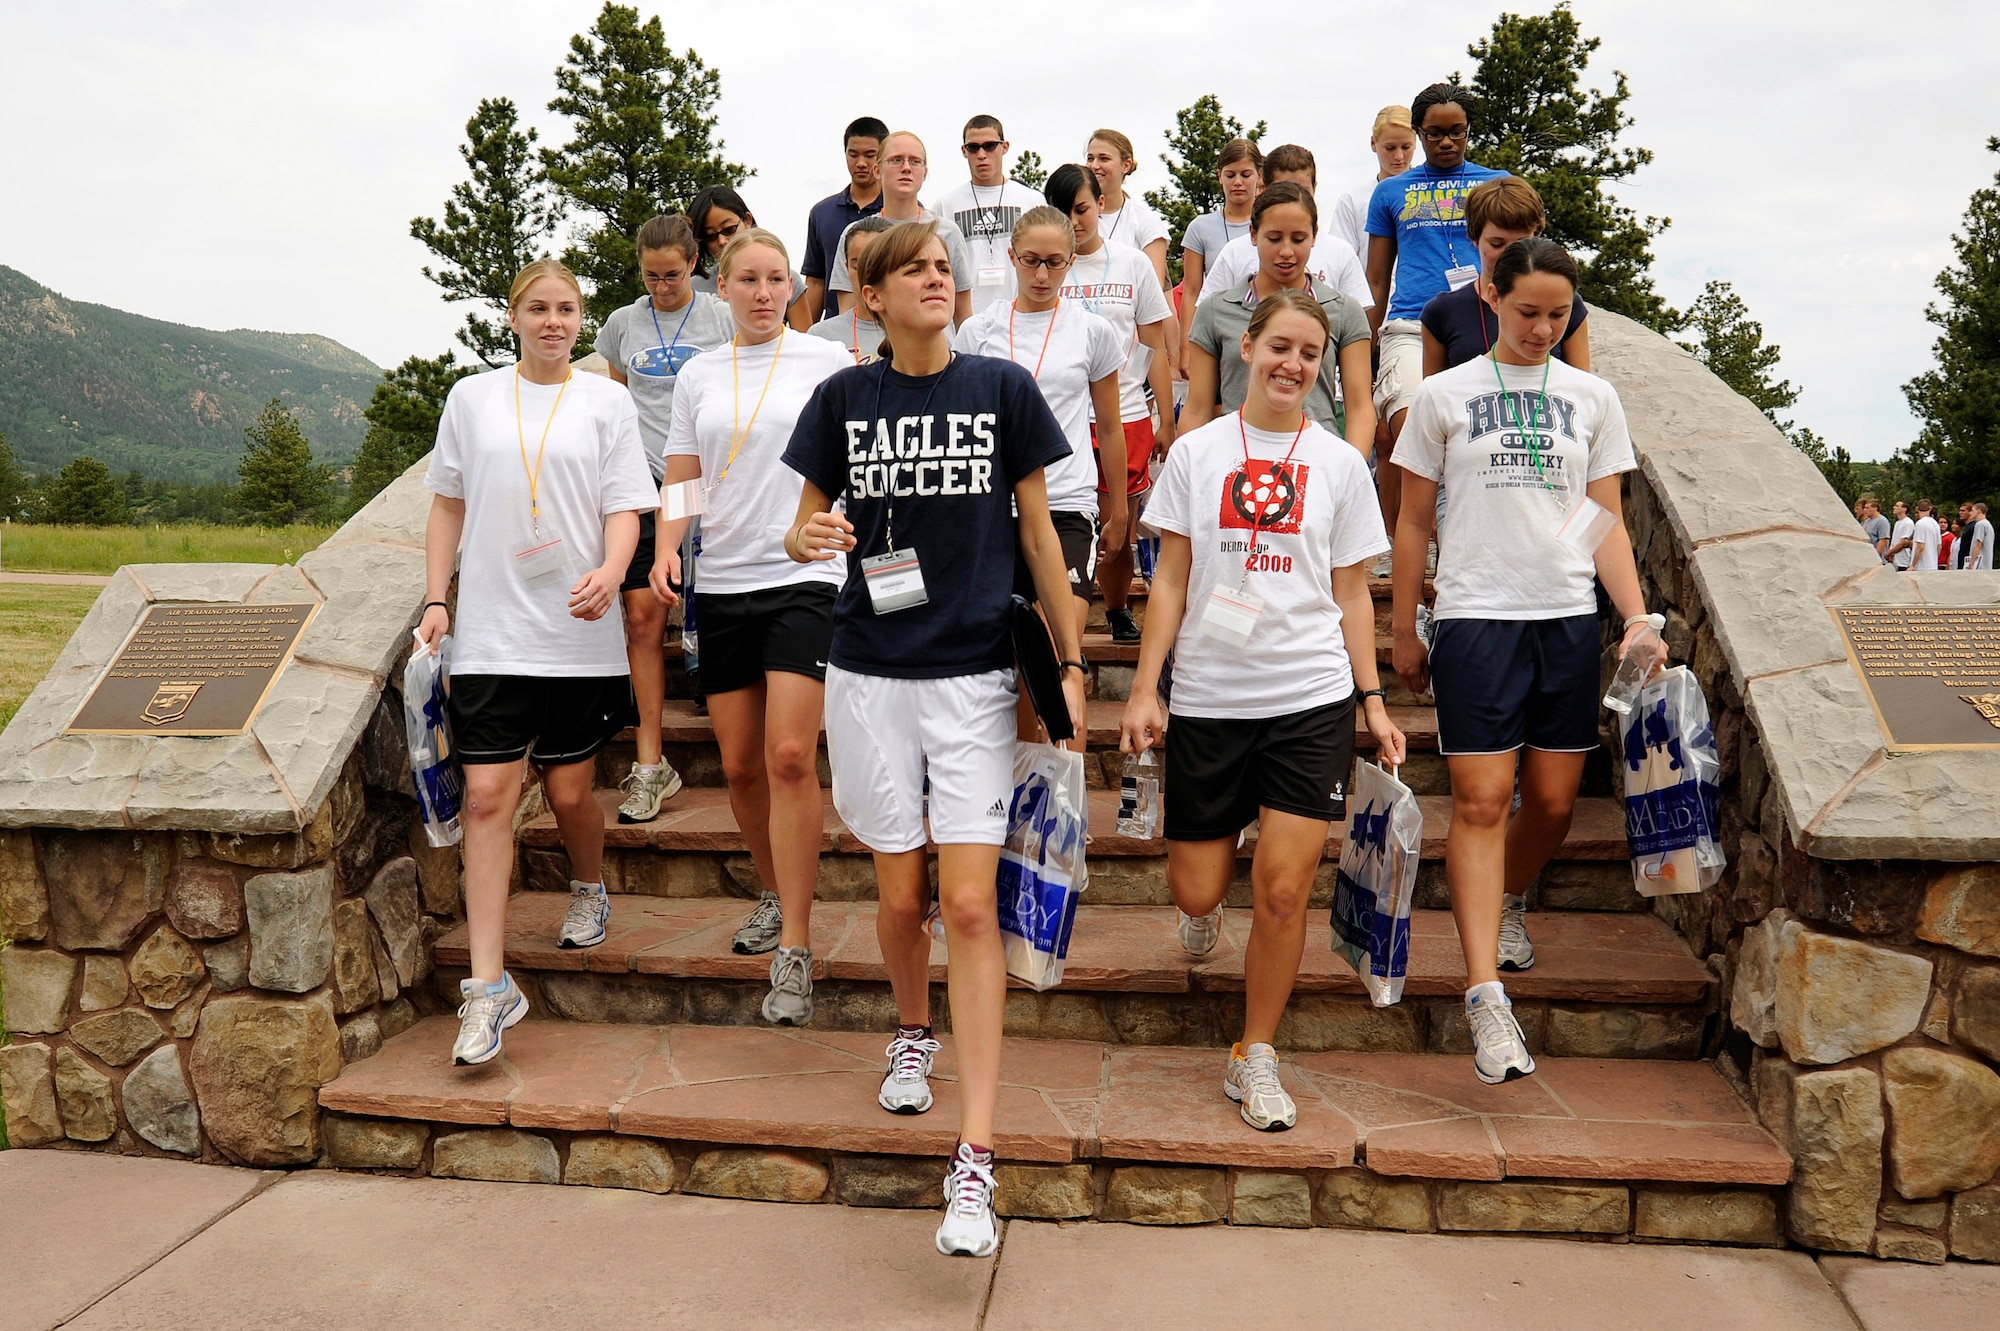 Basic cadets take their first steps into their Air Force careers as they leave Doolittle Hall and cross over the Memorial Bridge at the U.S. Air Force Academy in Colorado Springs, Colo., during cadet inprocessing June 25. (U.S. Air Force photo/Mike Kaplan)